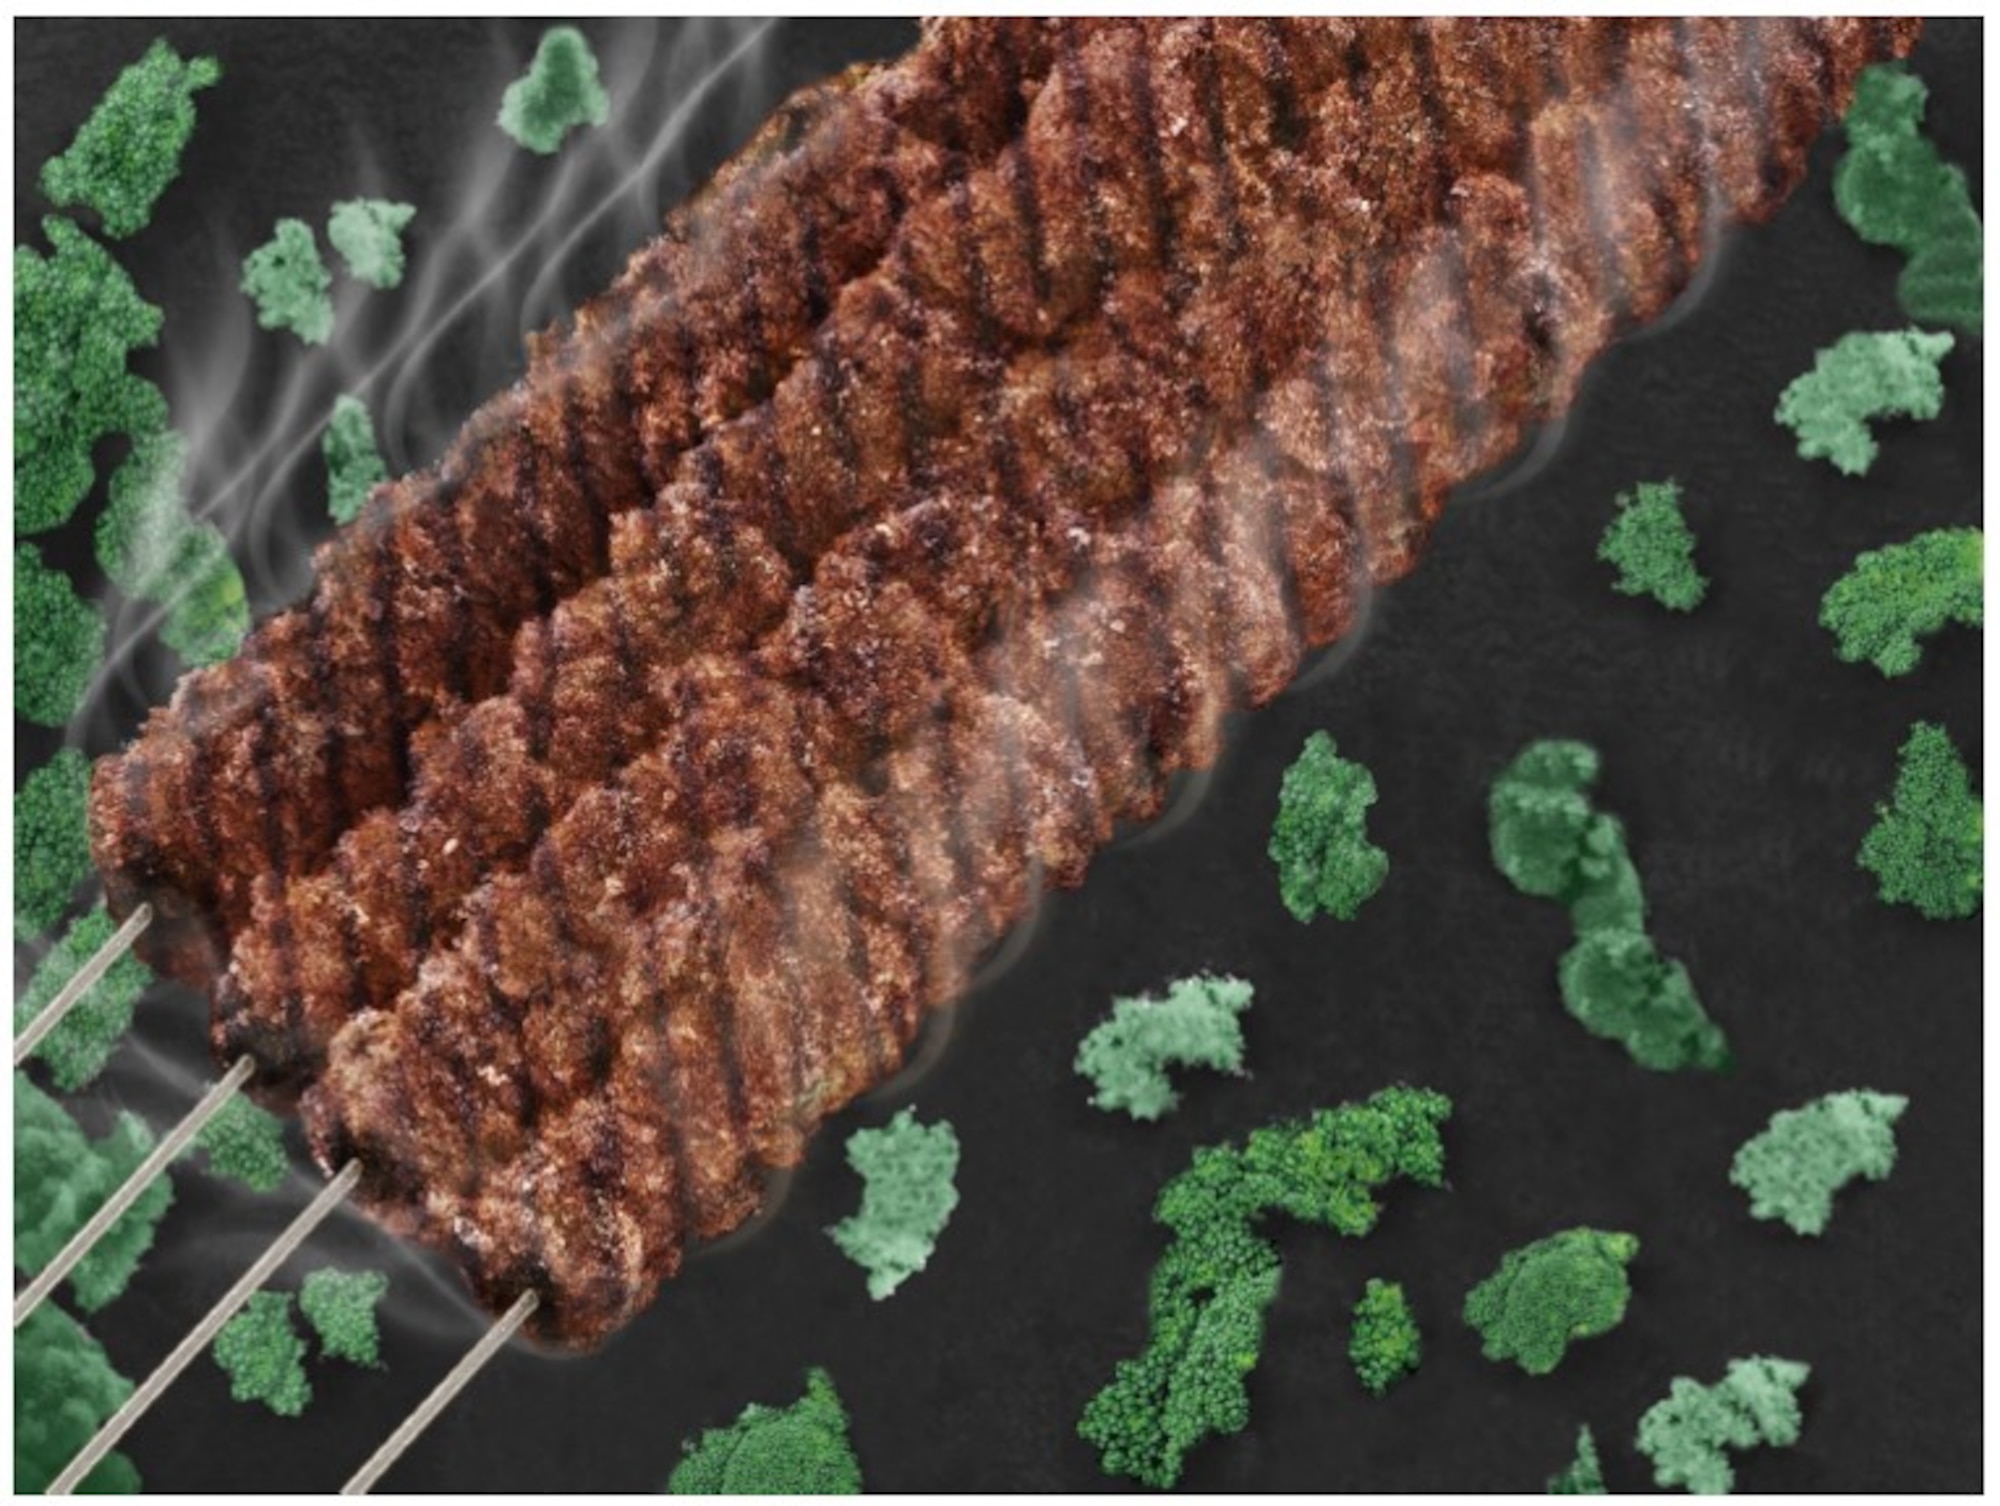 Carbon Nano Shish Kabob. This science as art piece is created by the scanning electron microscope image. Carbon nanotubes were deposited on carbon fibers via chemical vapor deposition method. The overgrowth of carbon nanotubes on carbon fibers created the shish kabob like carbon nanostructure. (Courtesy photo/Yixin Ren)